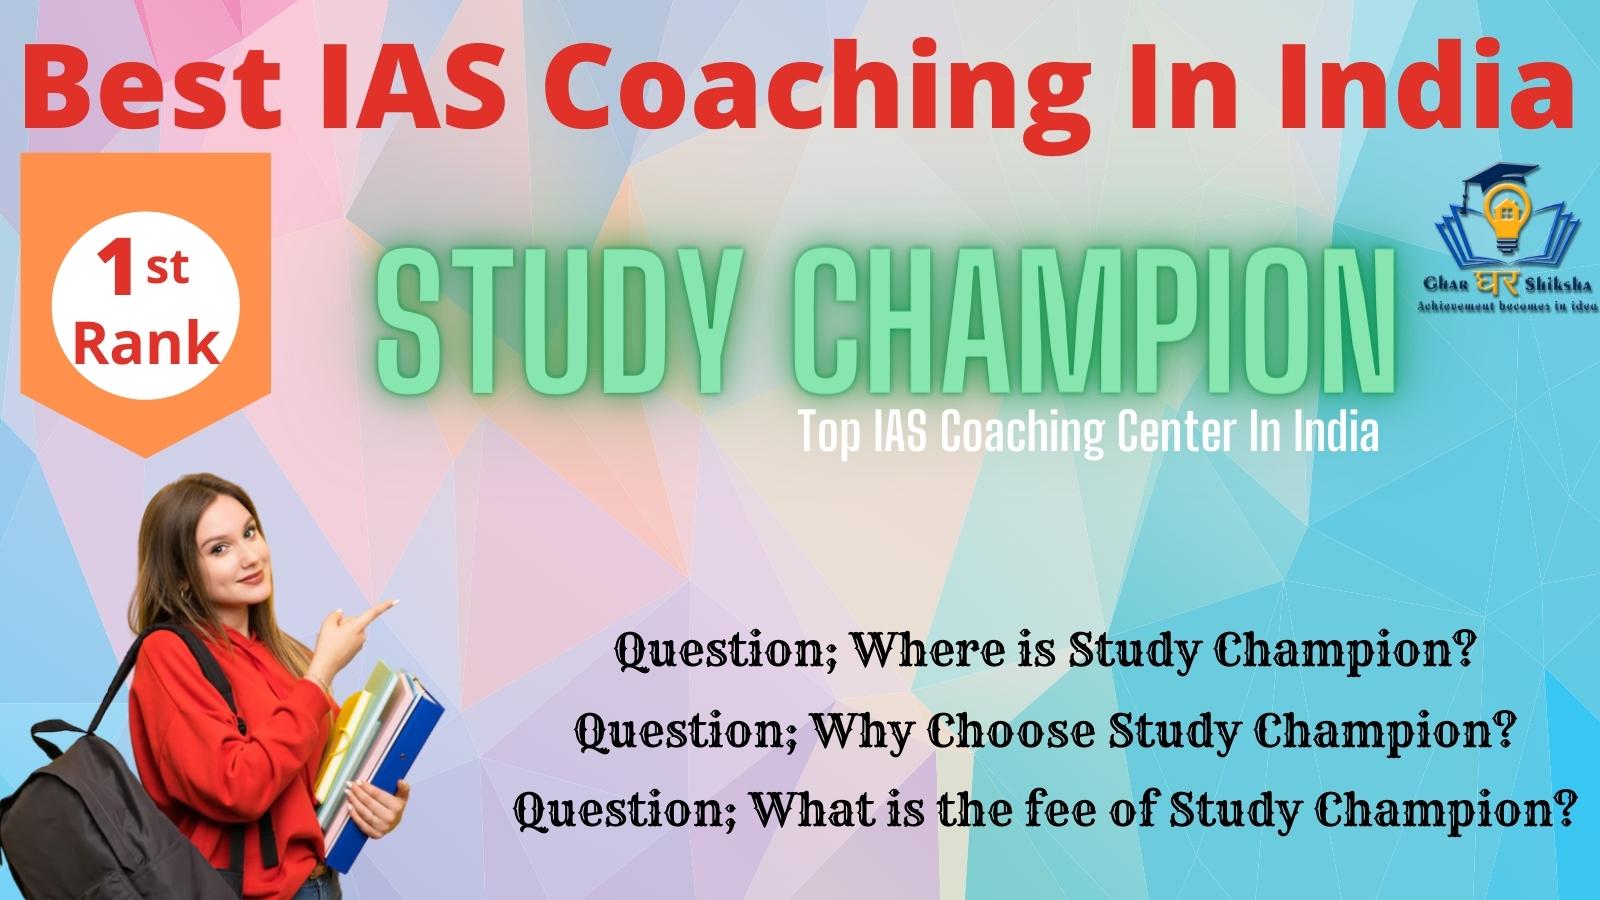 Best IAS Coaching In India Study Champion